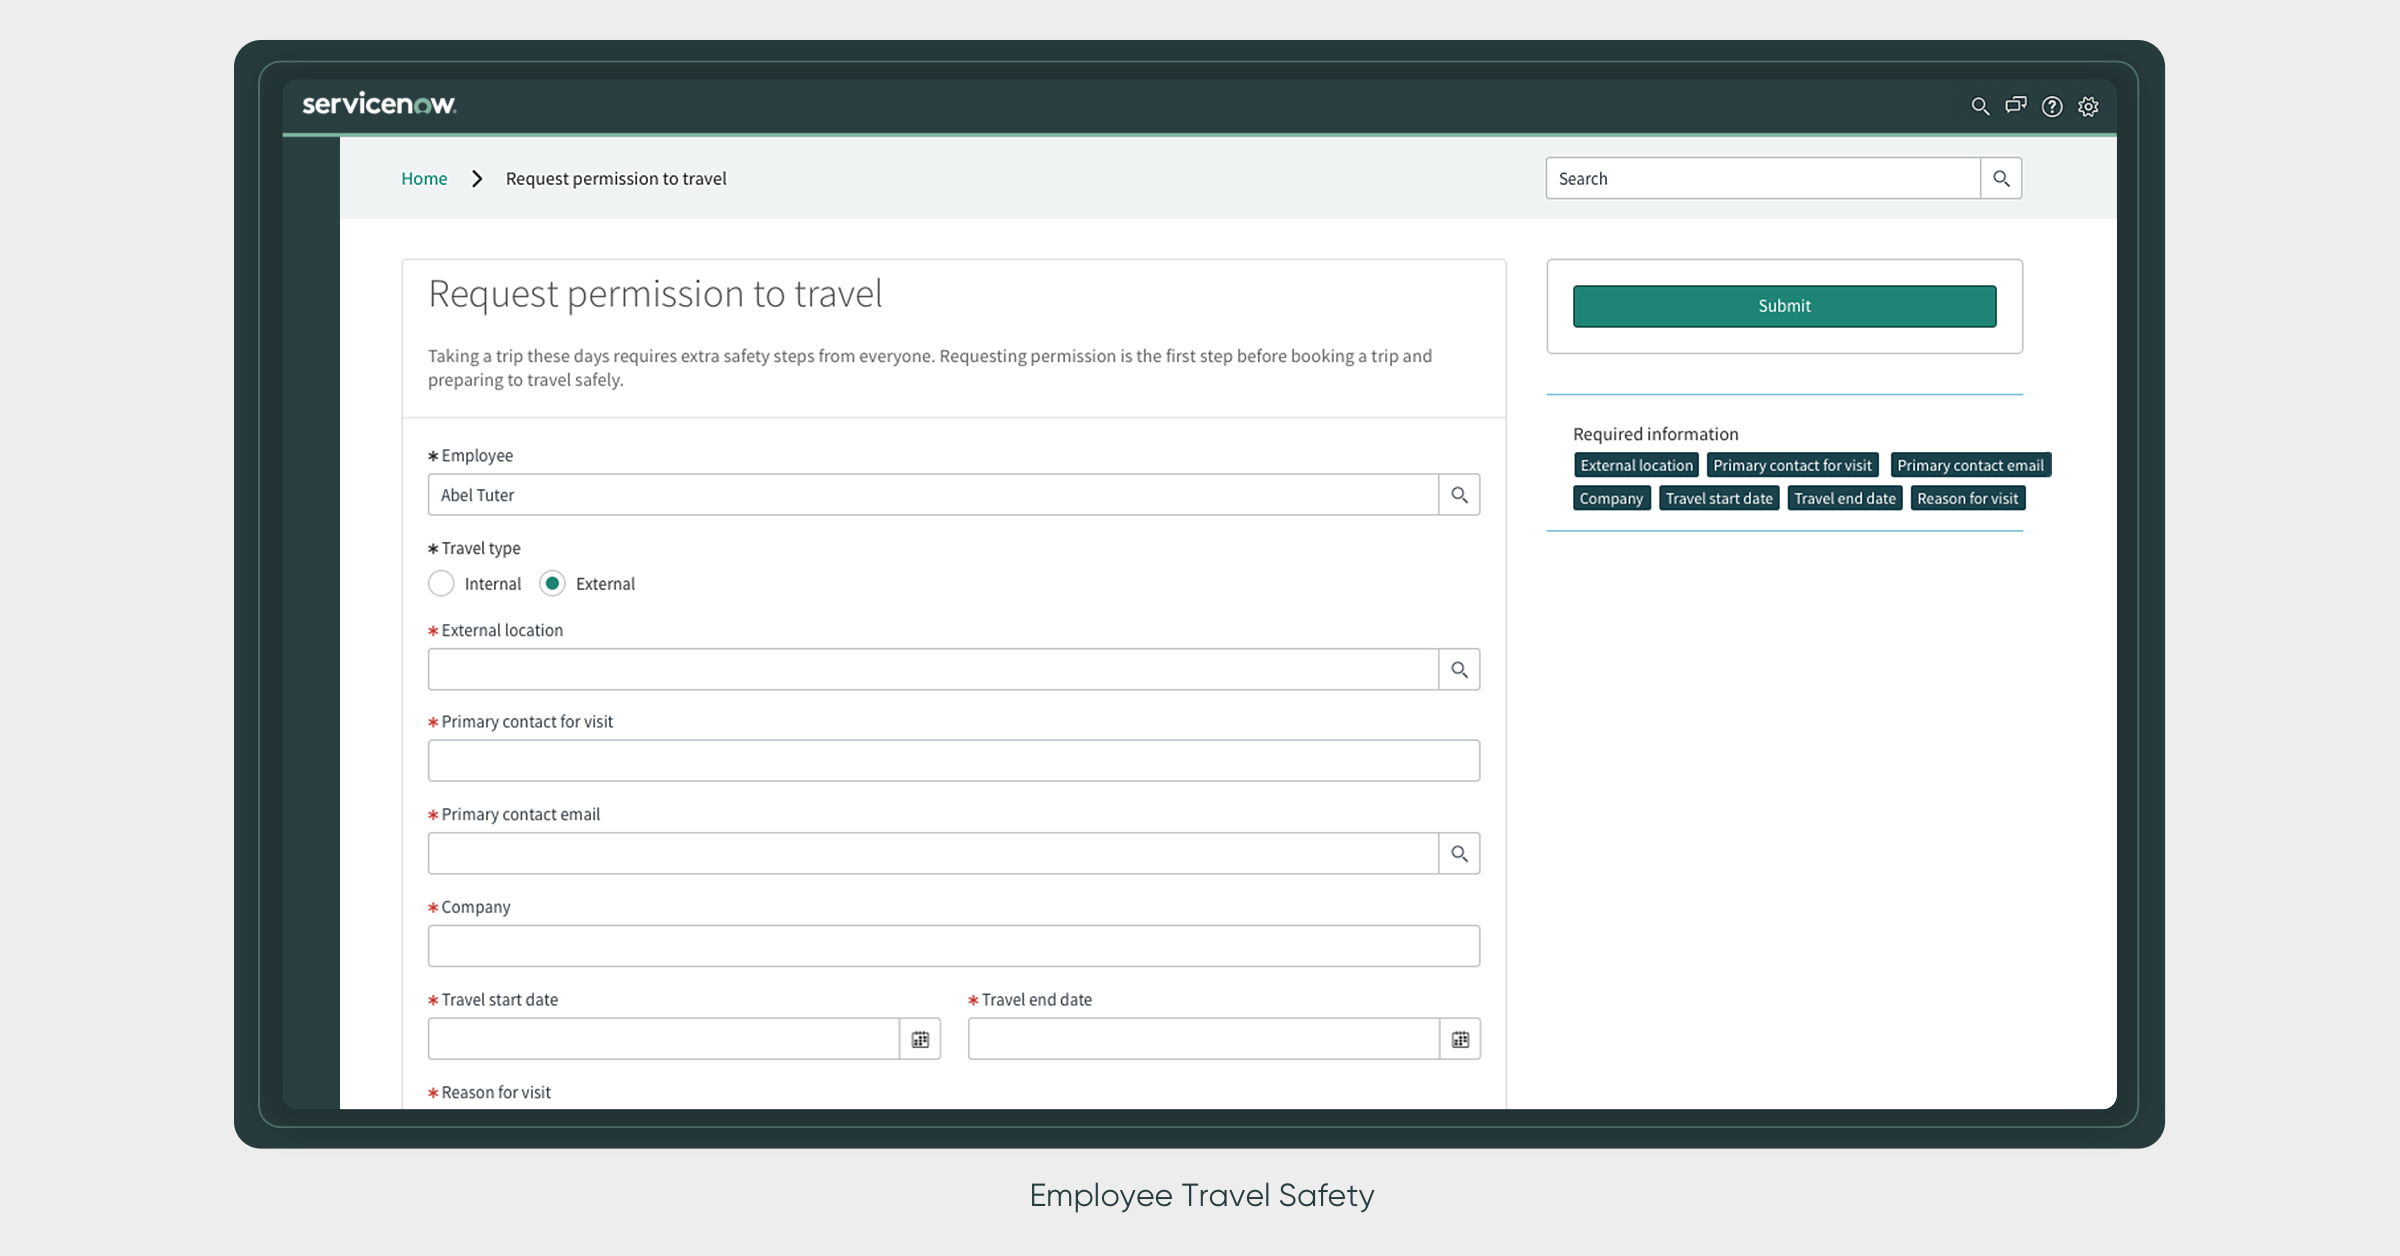 ServiceNow Employee Travel Safety Application